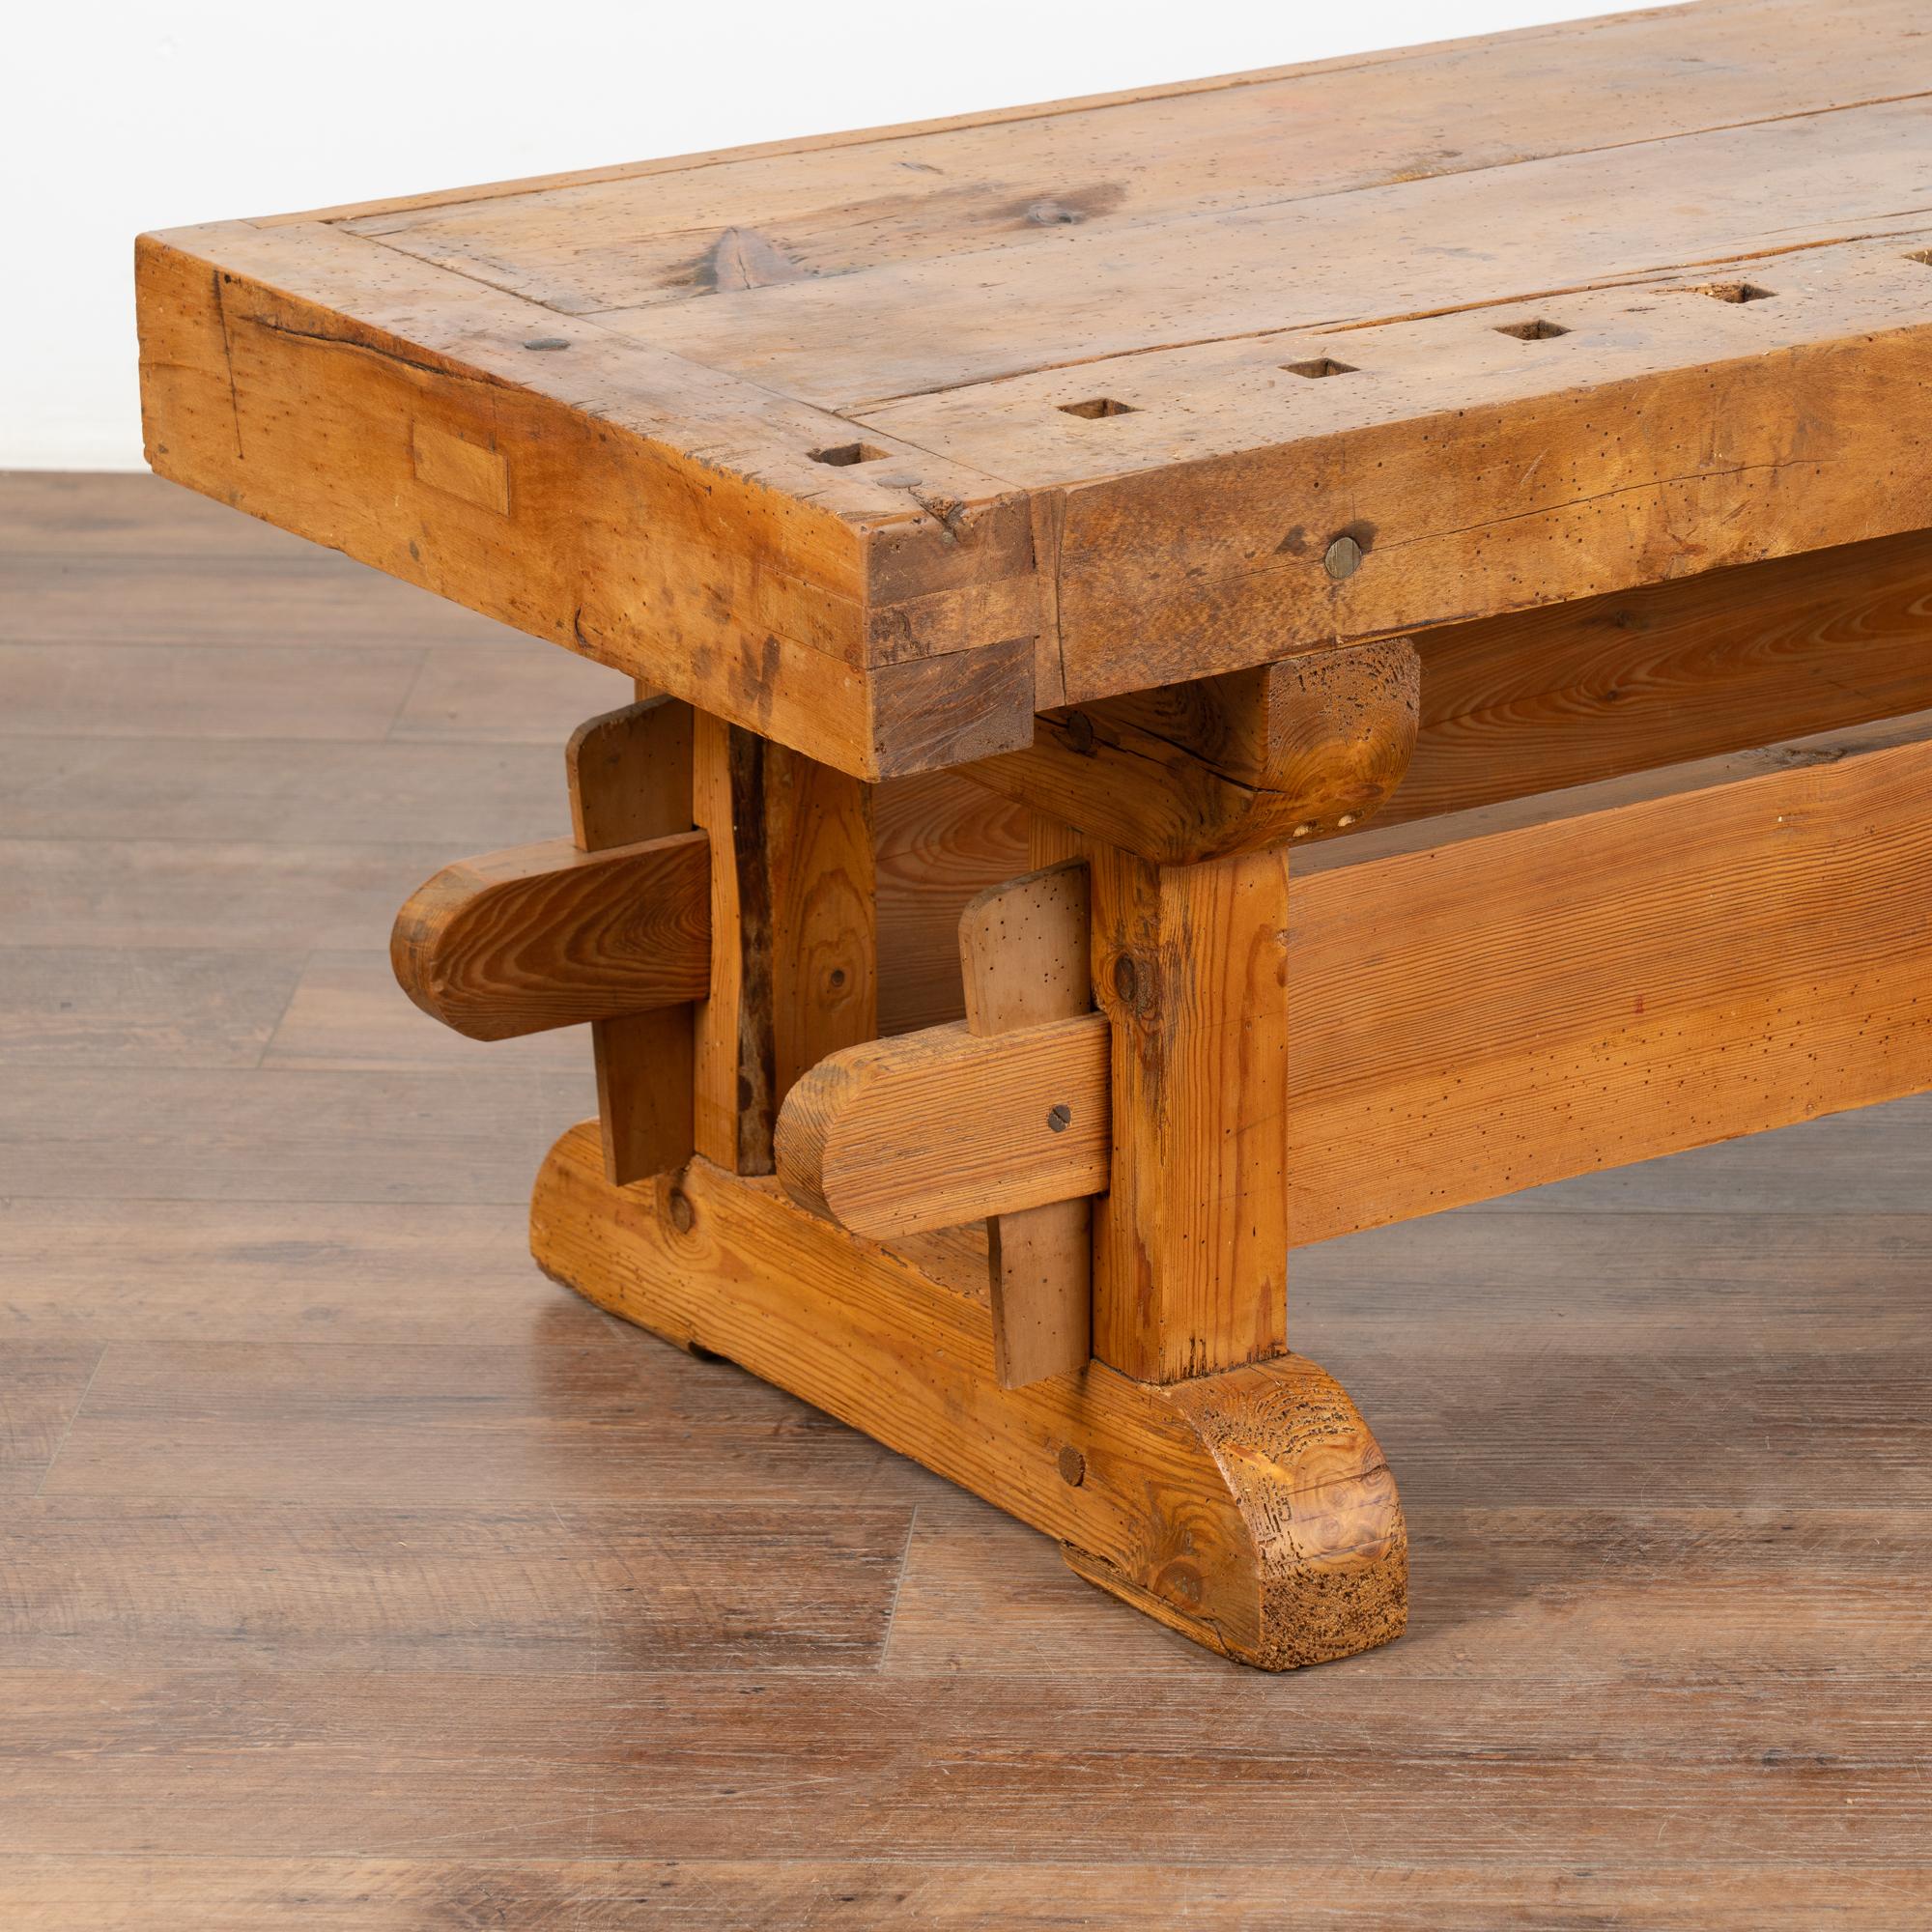 20th Century Rustic Coffee Table Made from Carpenters Workbench, Denmark circa 1920